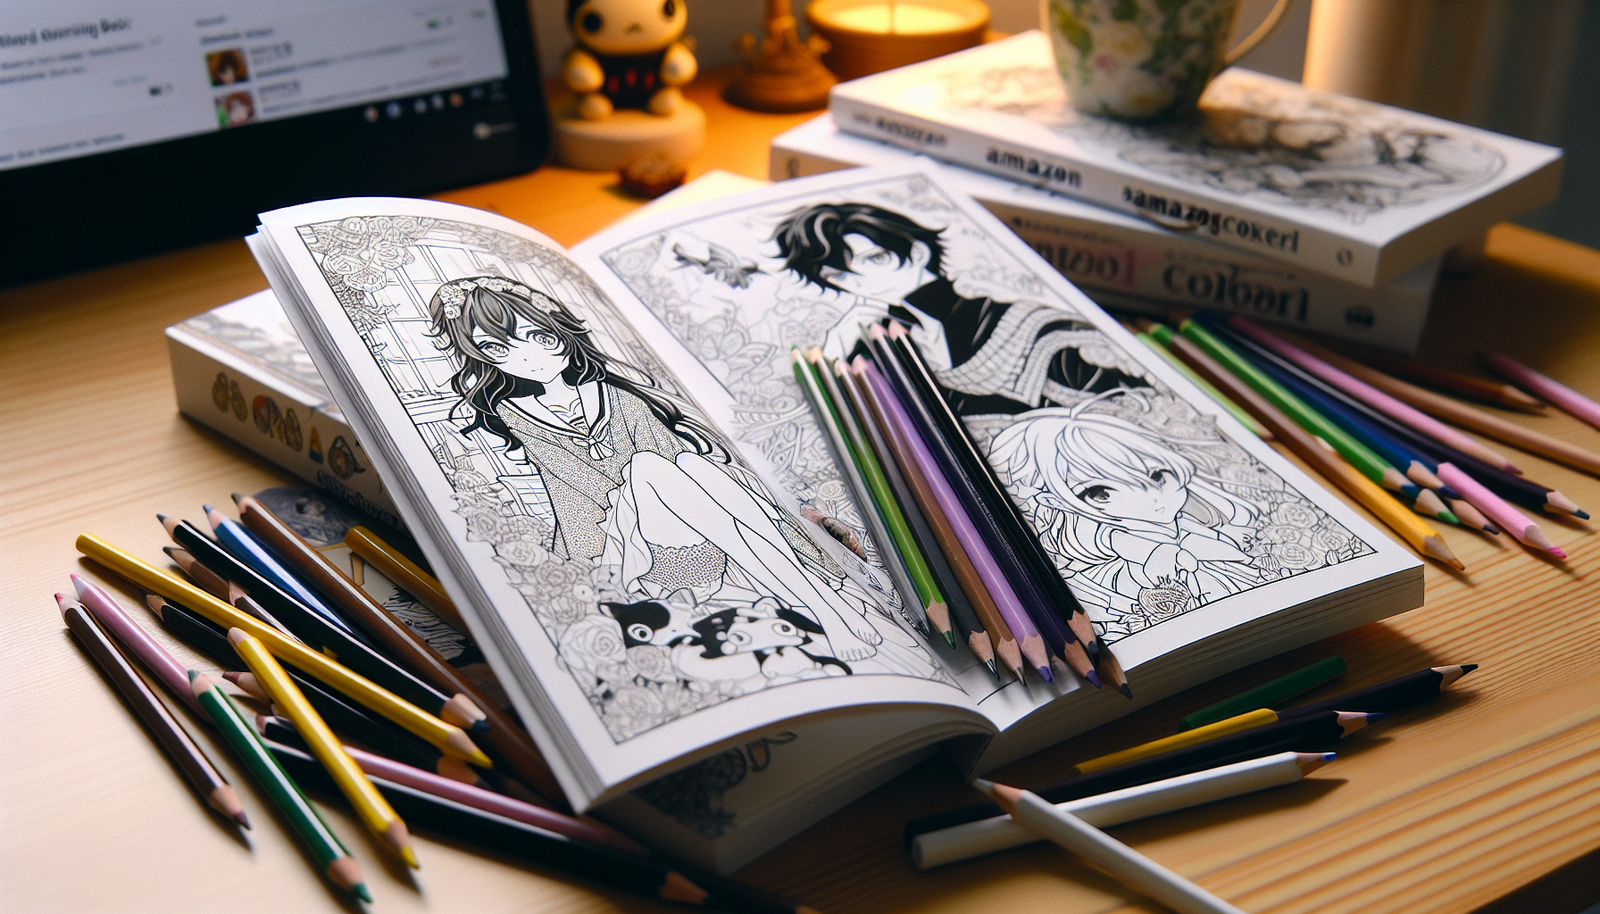 Discounted Anime-Style Coloring Book Available on Amazon